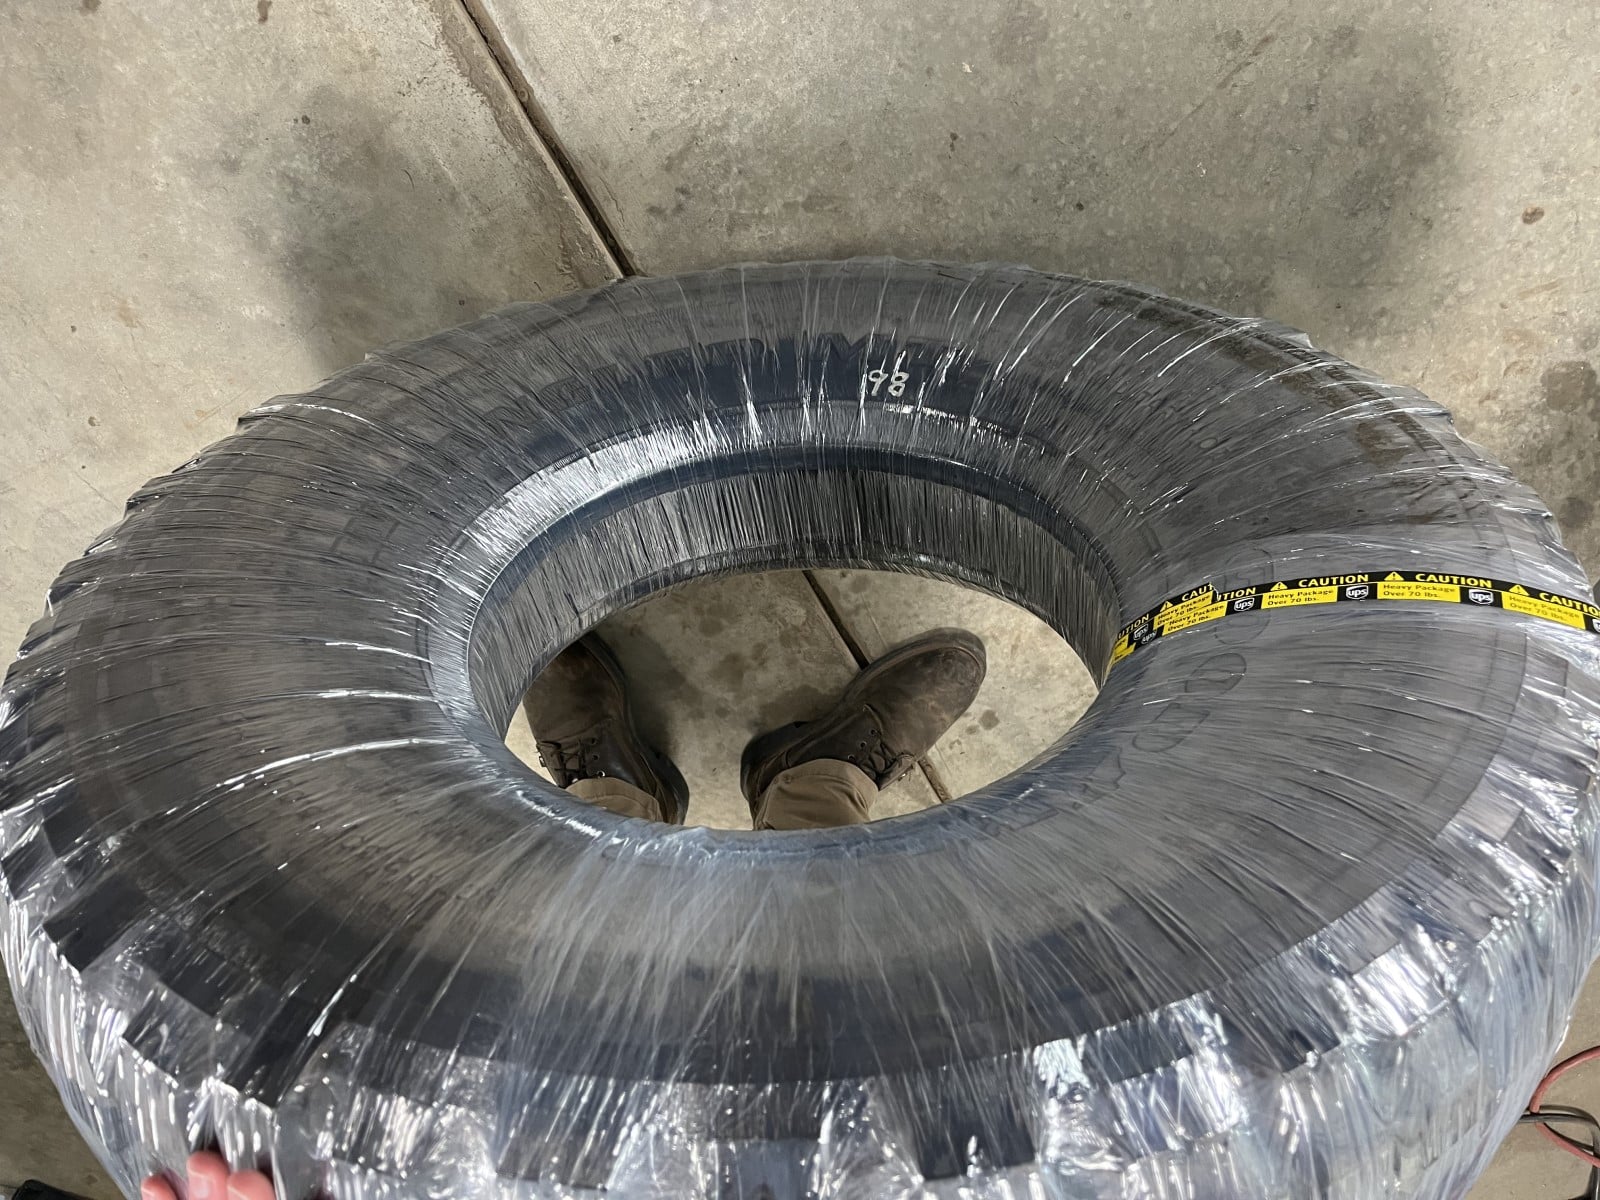 A stretch wrapped tire